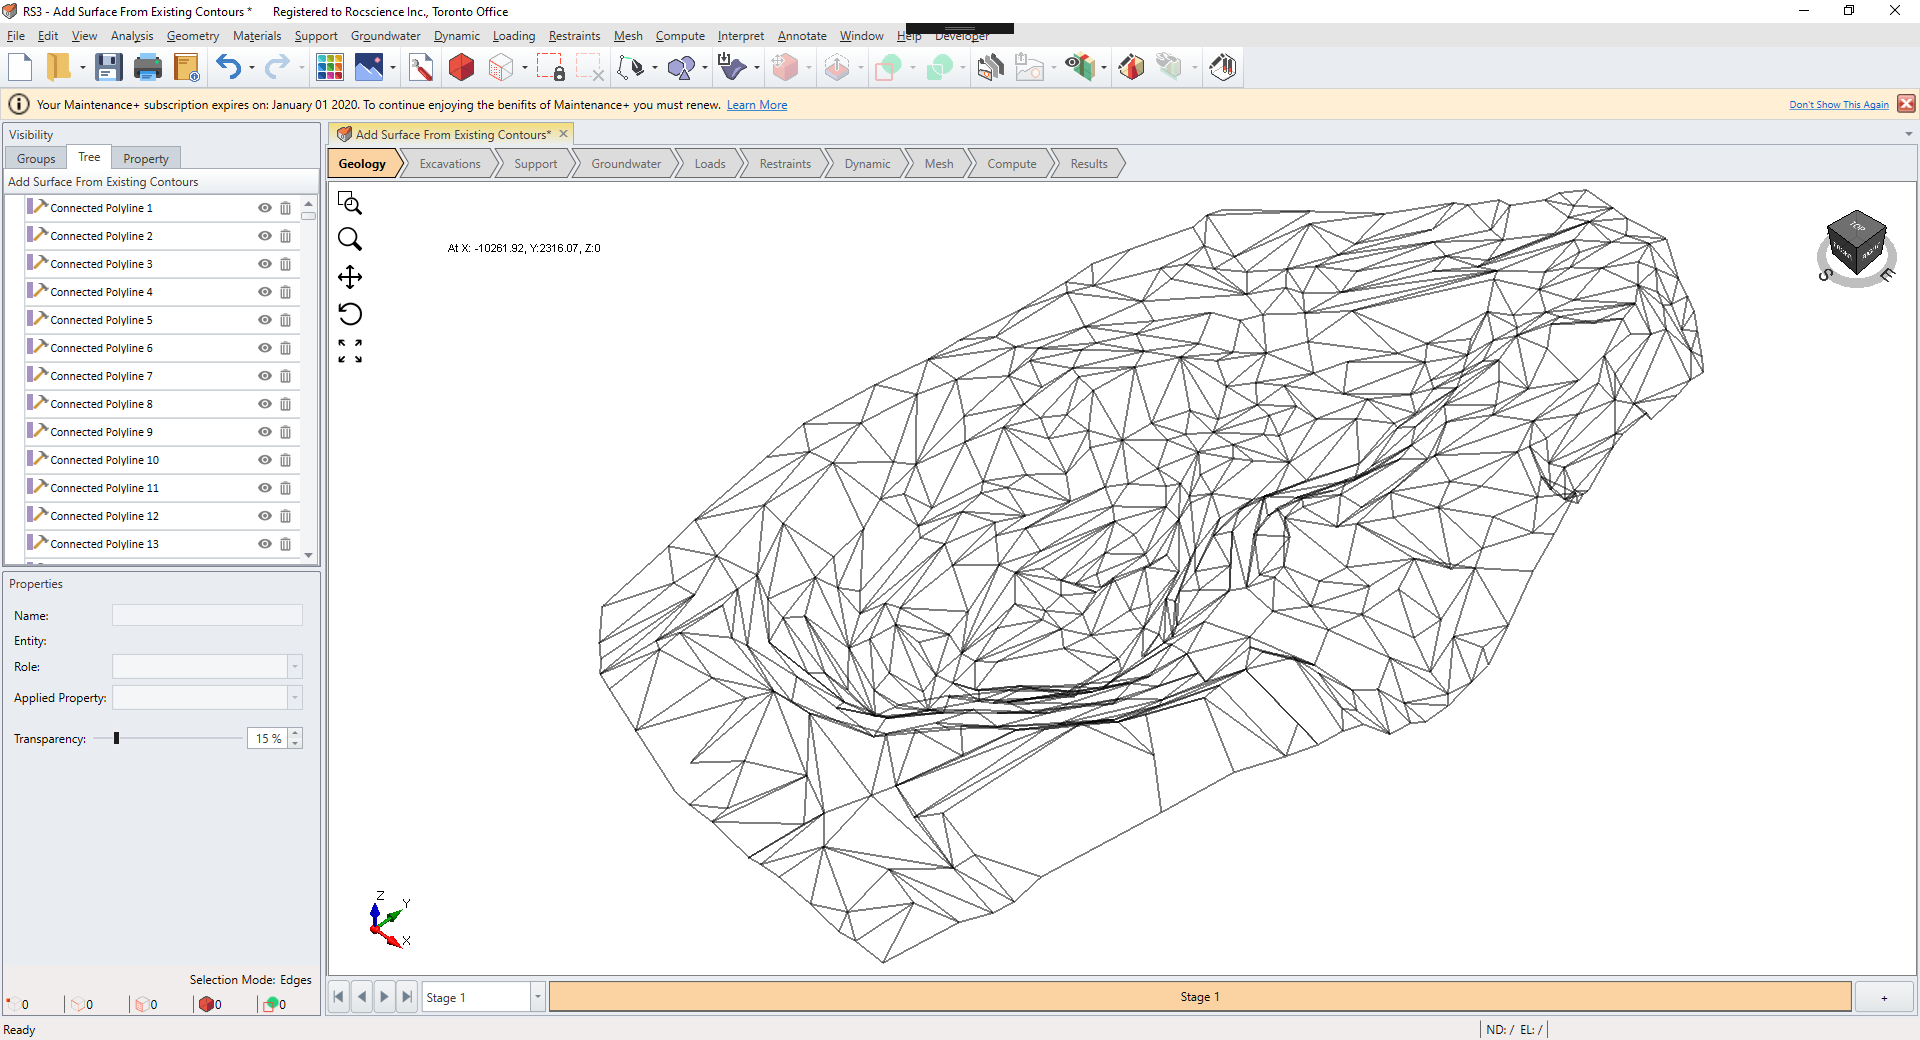 Add Surface From Existing Contours Geometry Model View